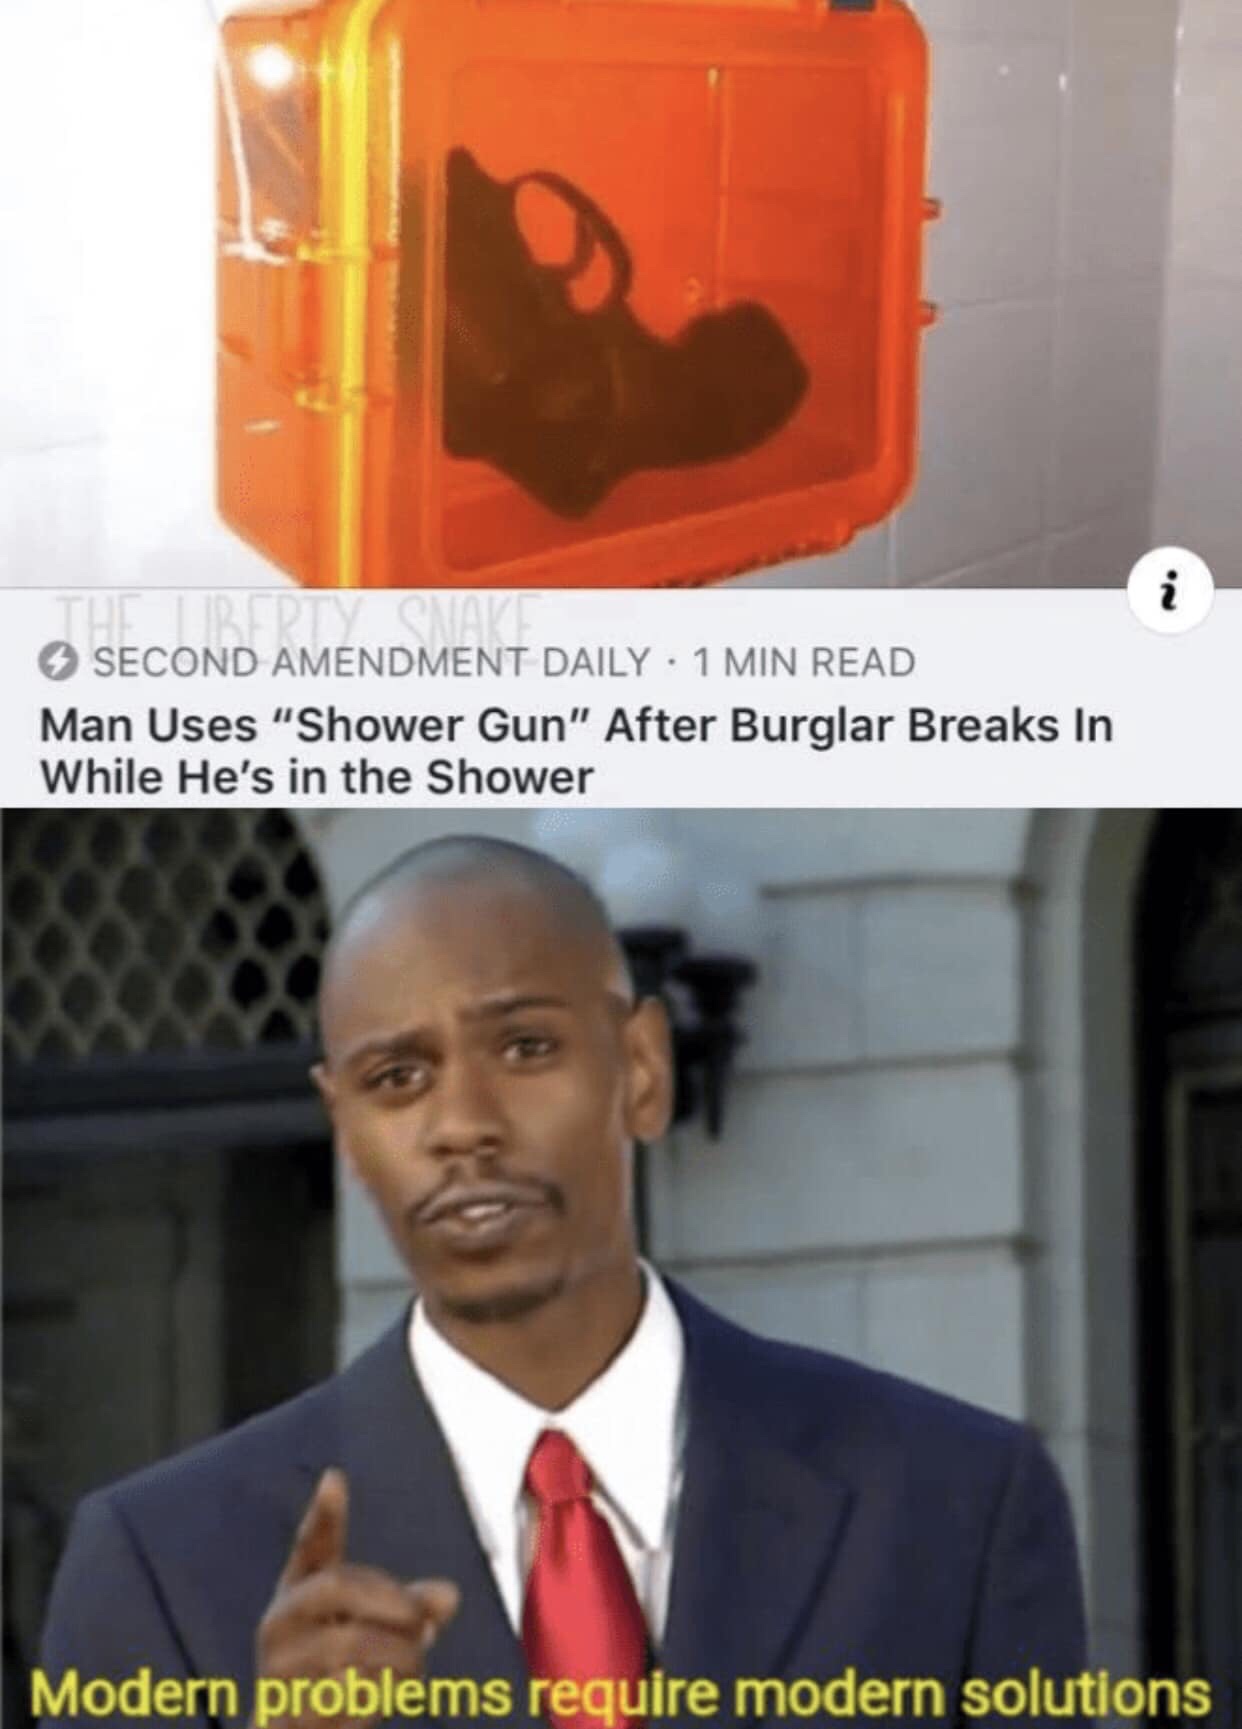 modern problems require modern solutions - Second Amendment Daily 1 Min Read Man Uses "Shower Gun" After Burglar Breaks In While He's in the Shower Modern problems require modern solutions